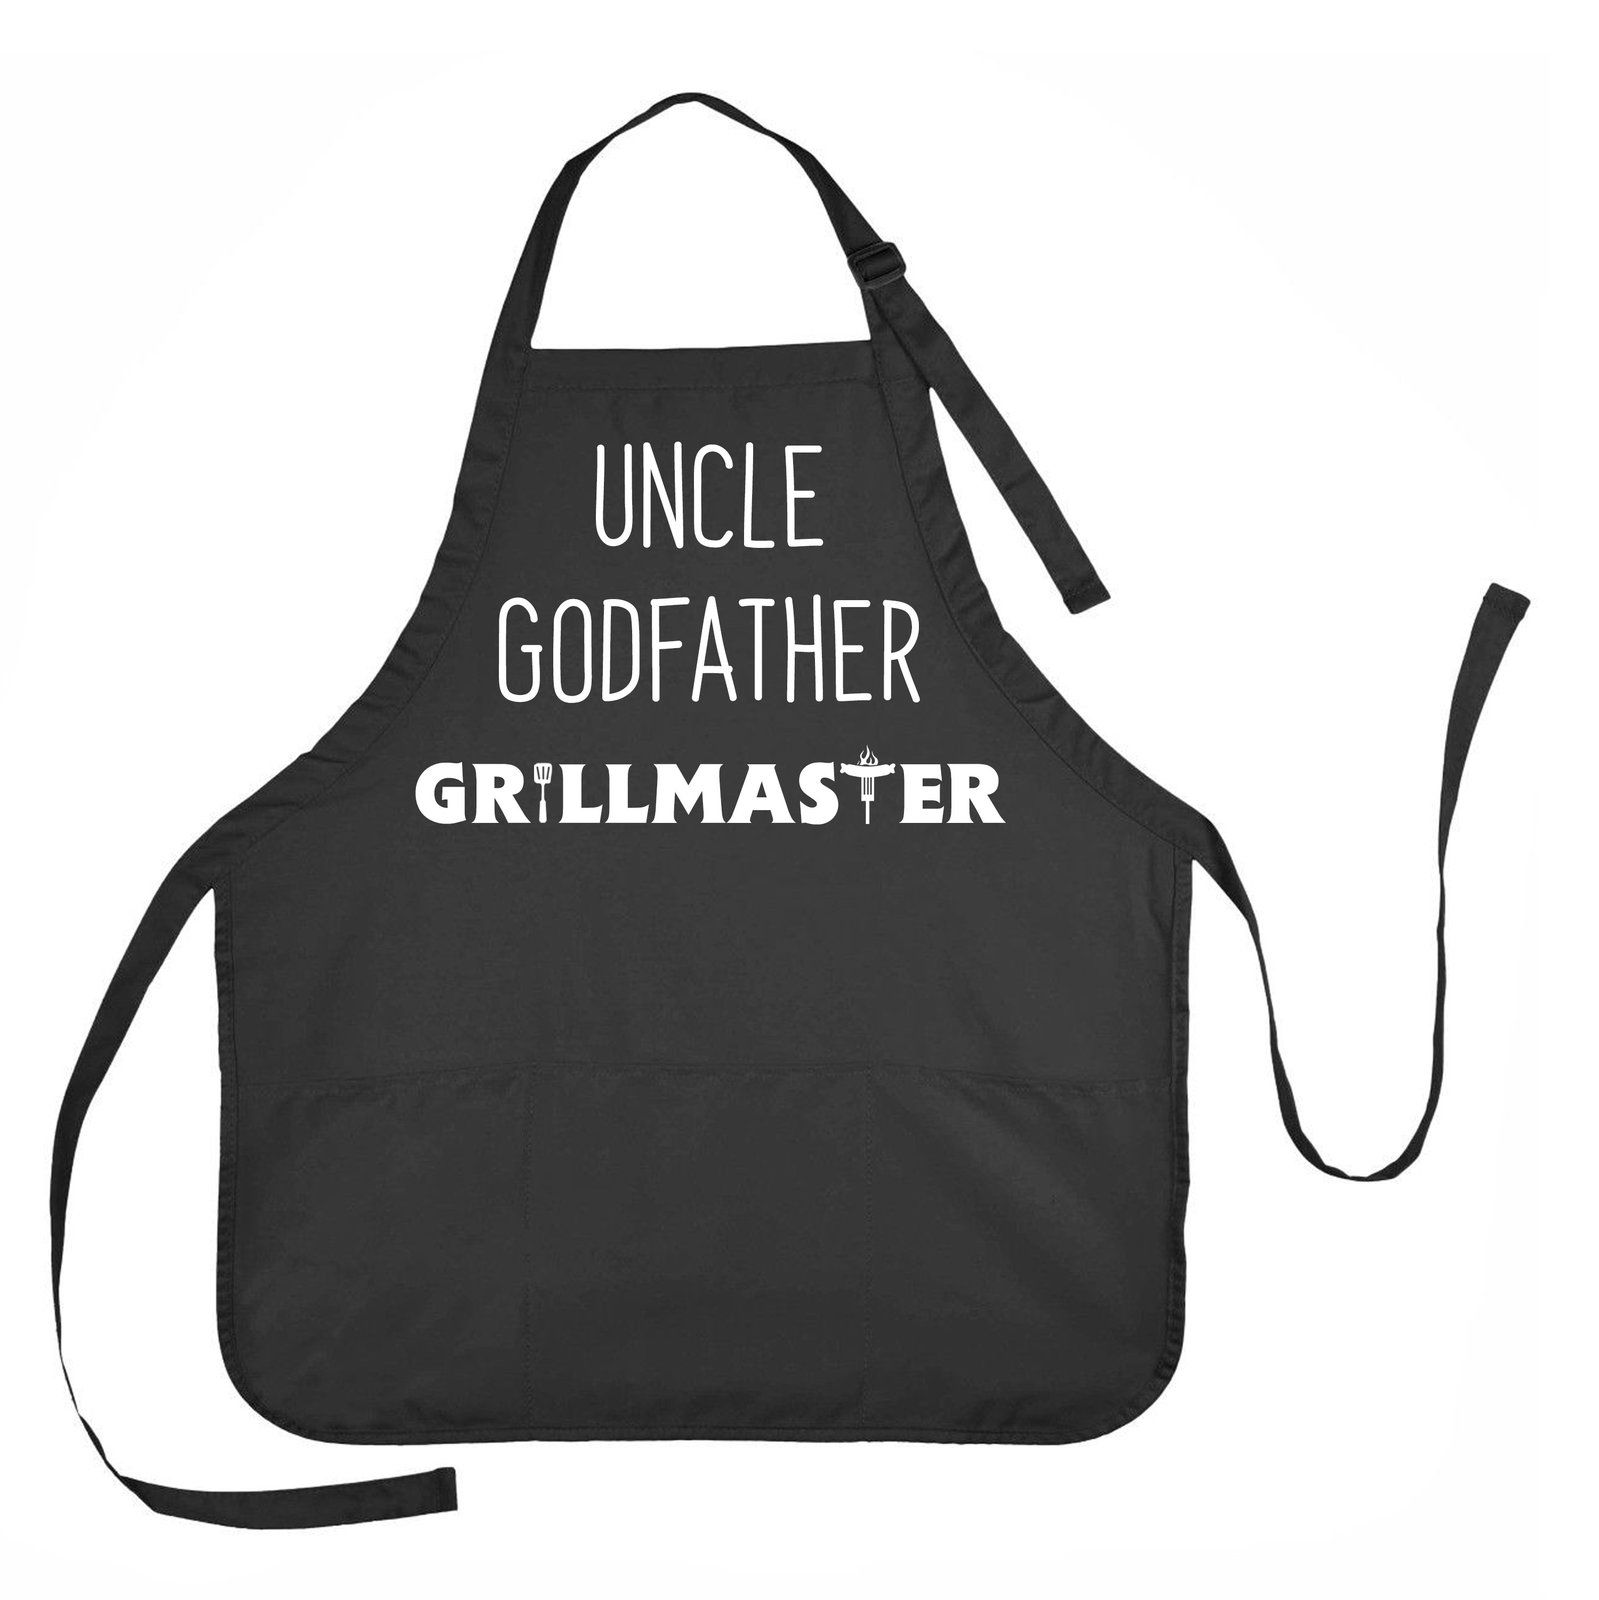 Primary image for Uncle, Godfather, Grillmaster Apron, Godfather Gift, Godfather Apron, Grillmaste